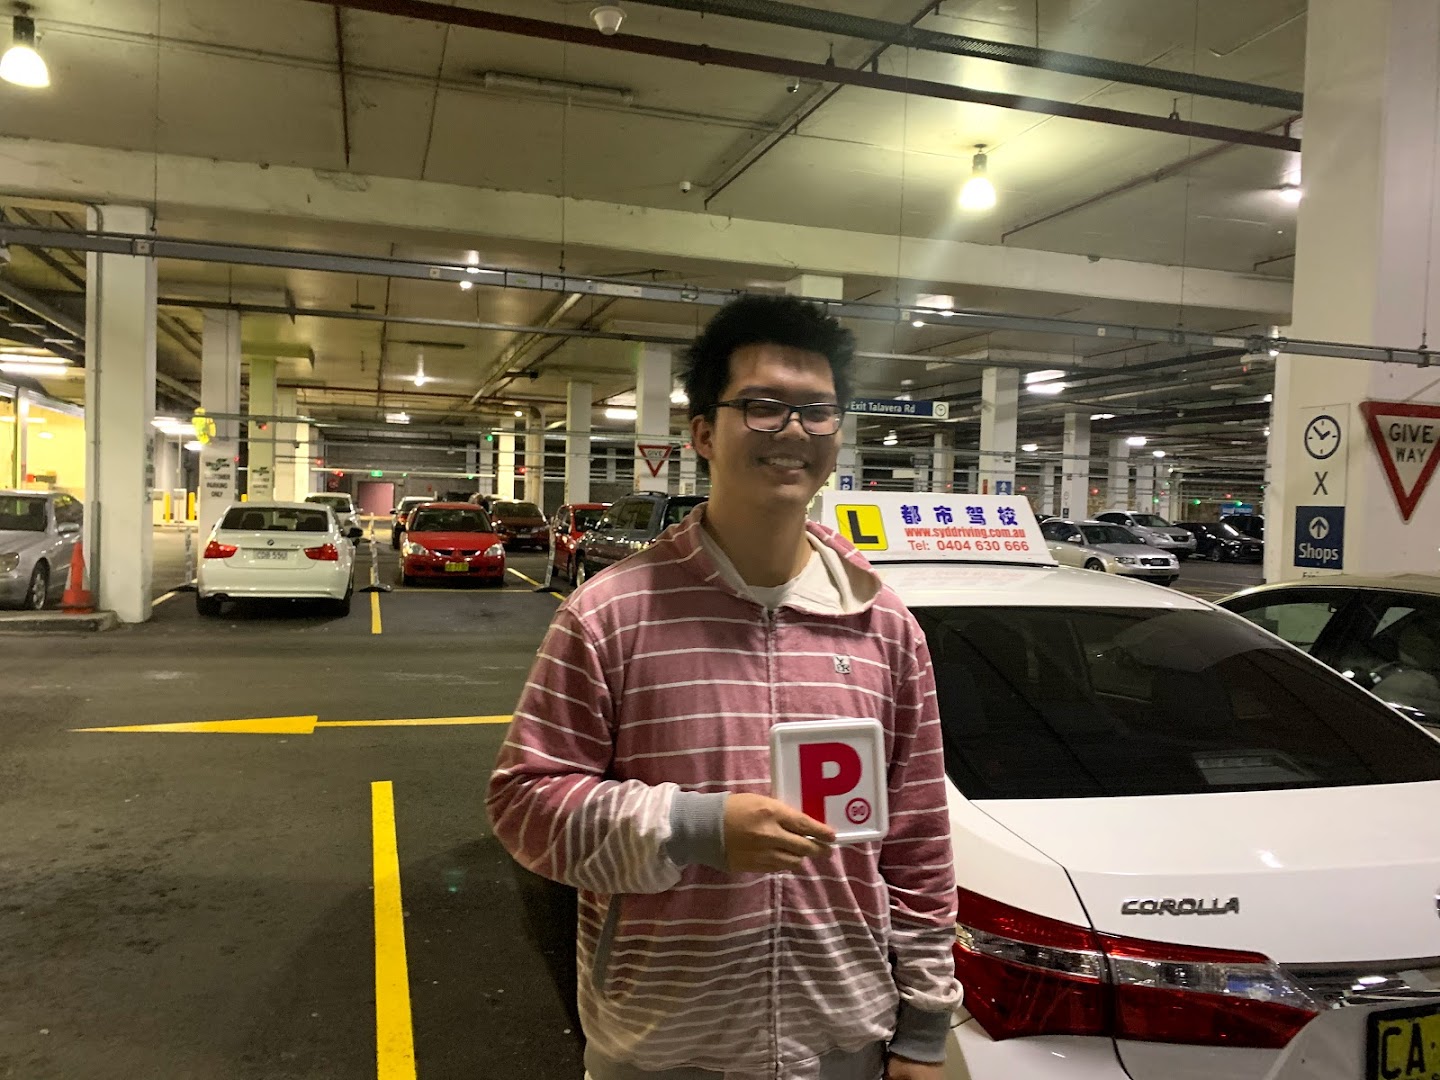 epping(covidsafe)driving school sydney driving lessons & instructors / 华人驾校 学车教练